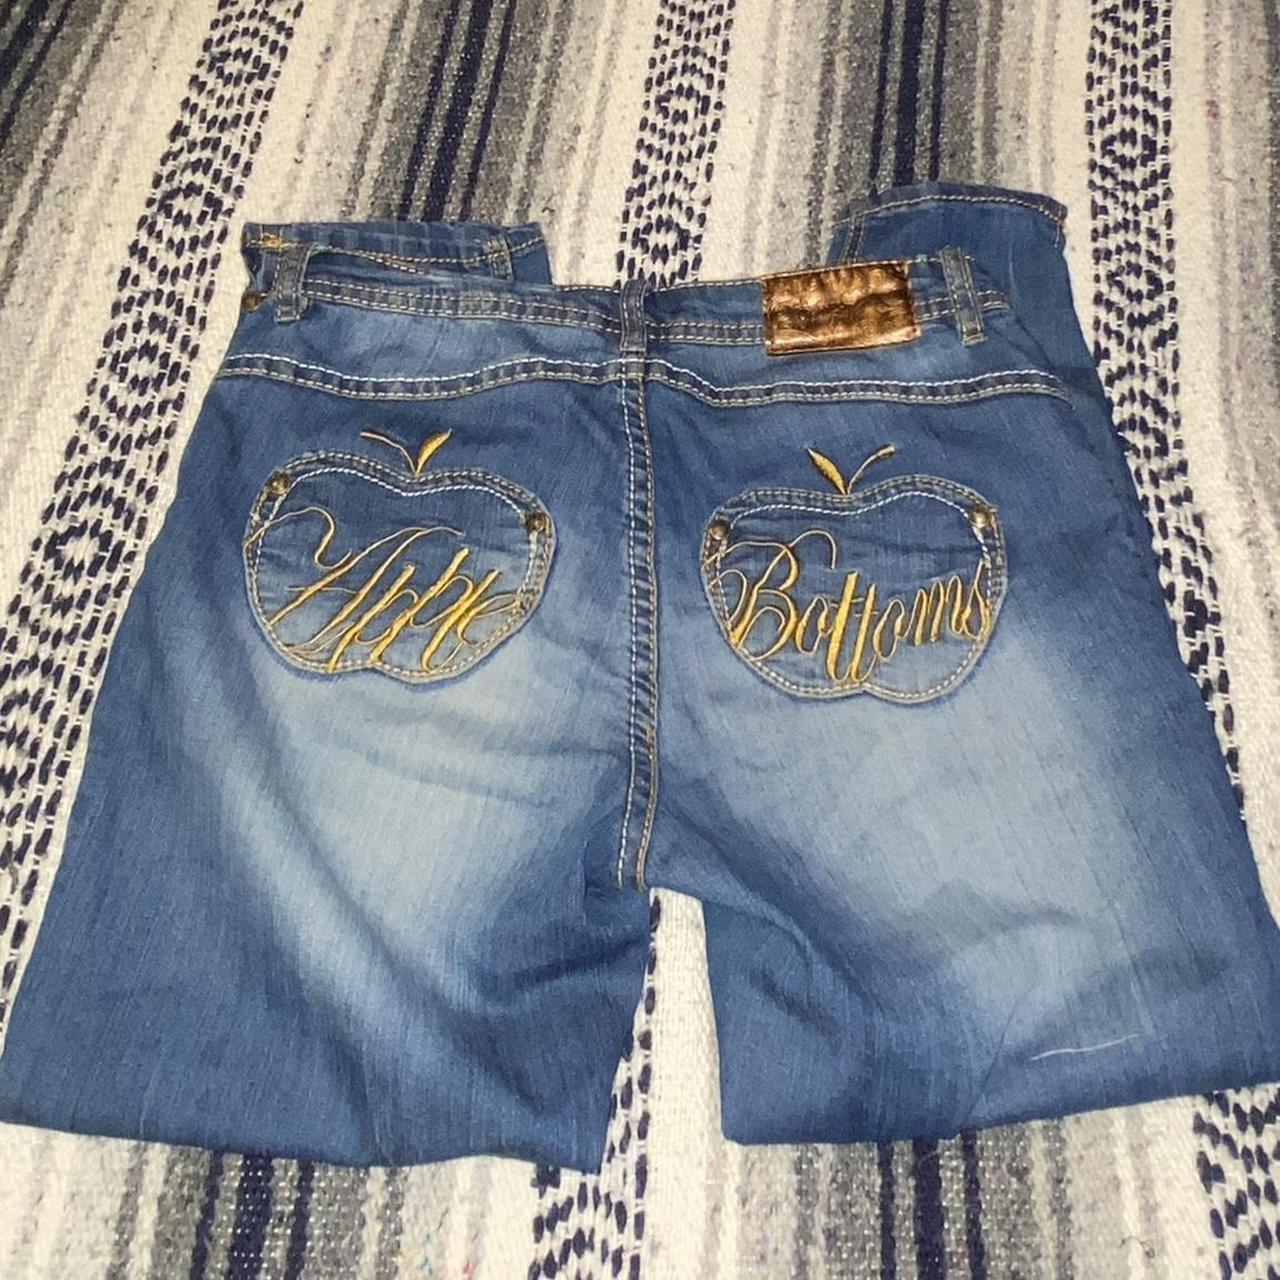 Apple Bottoms Women's Blue and Gold Jeans (6)